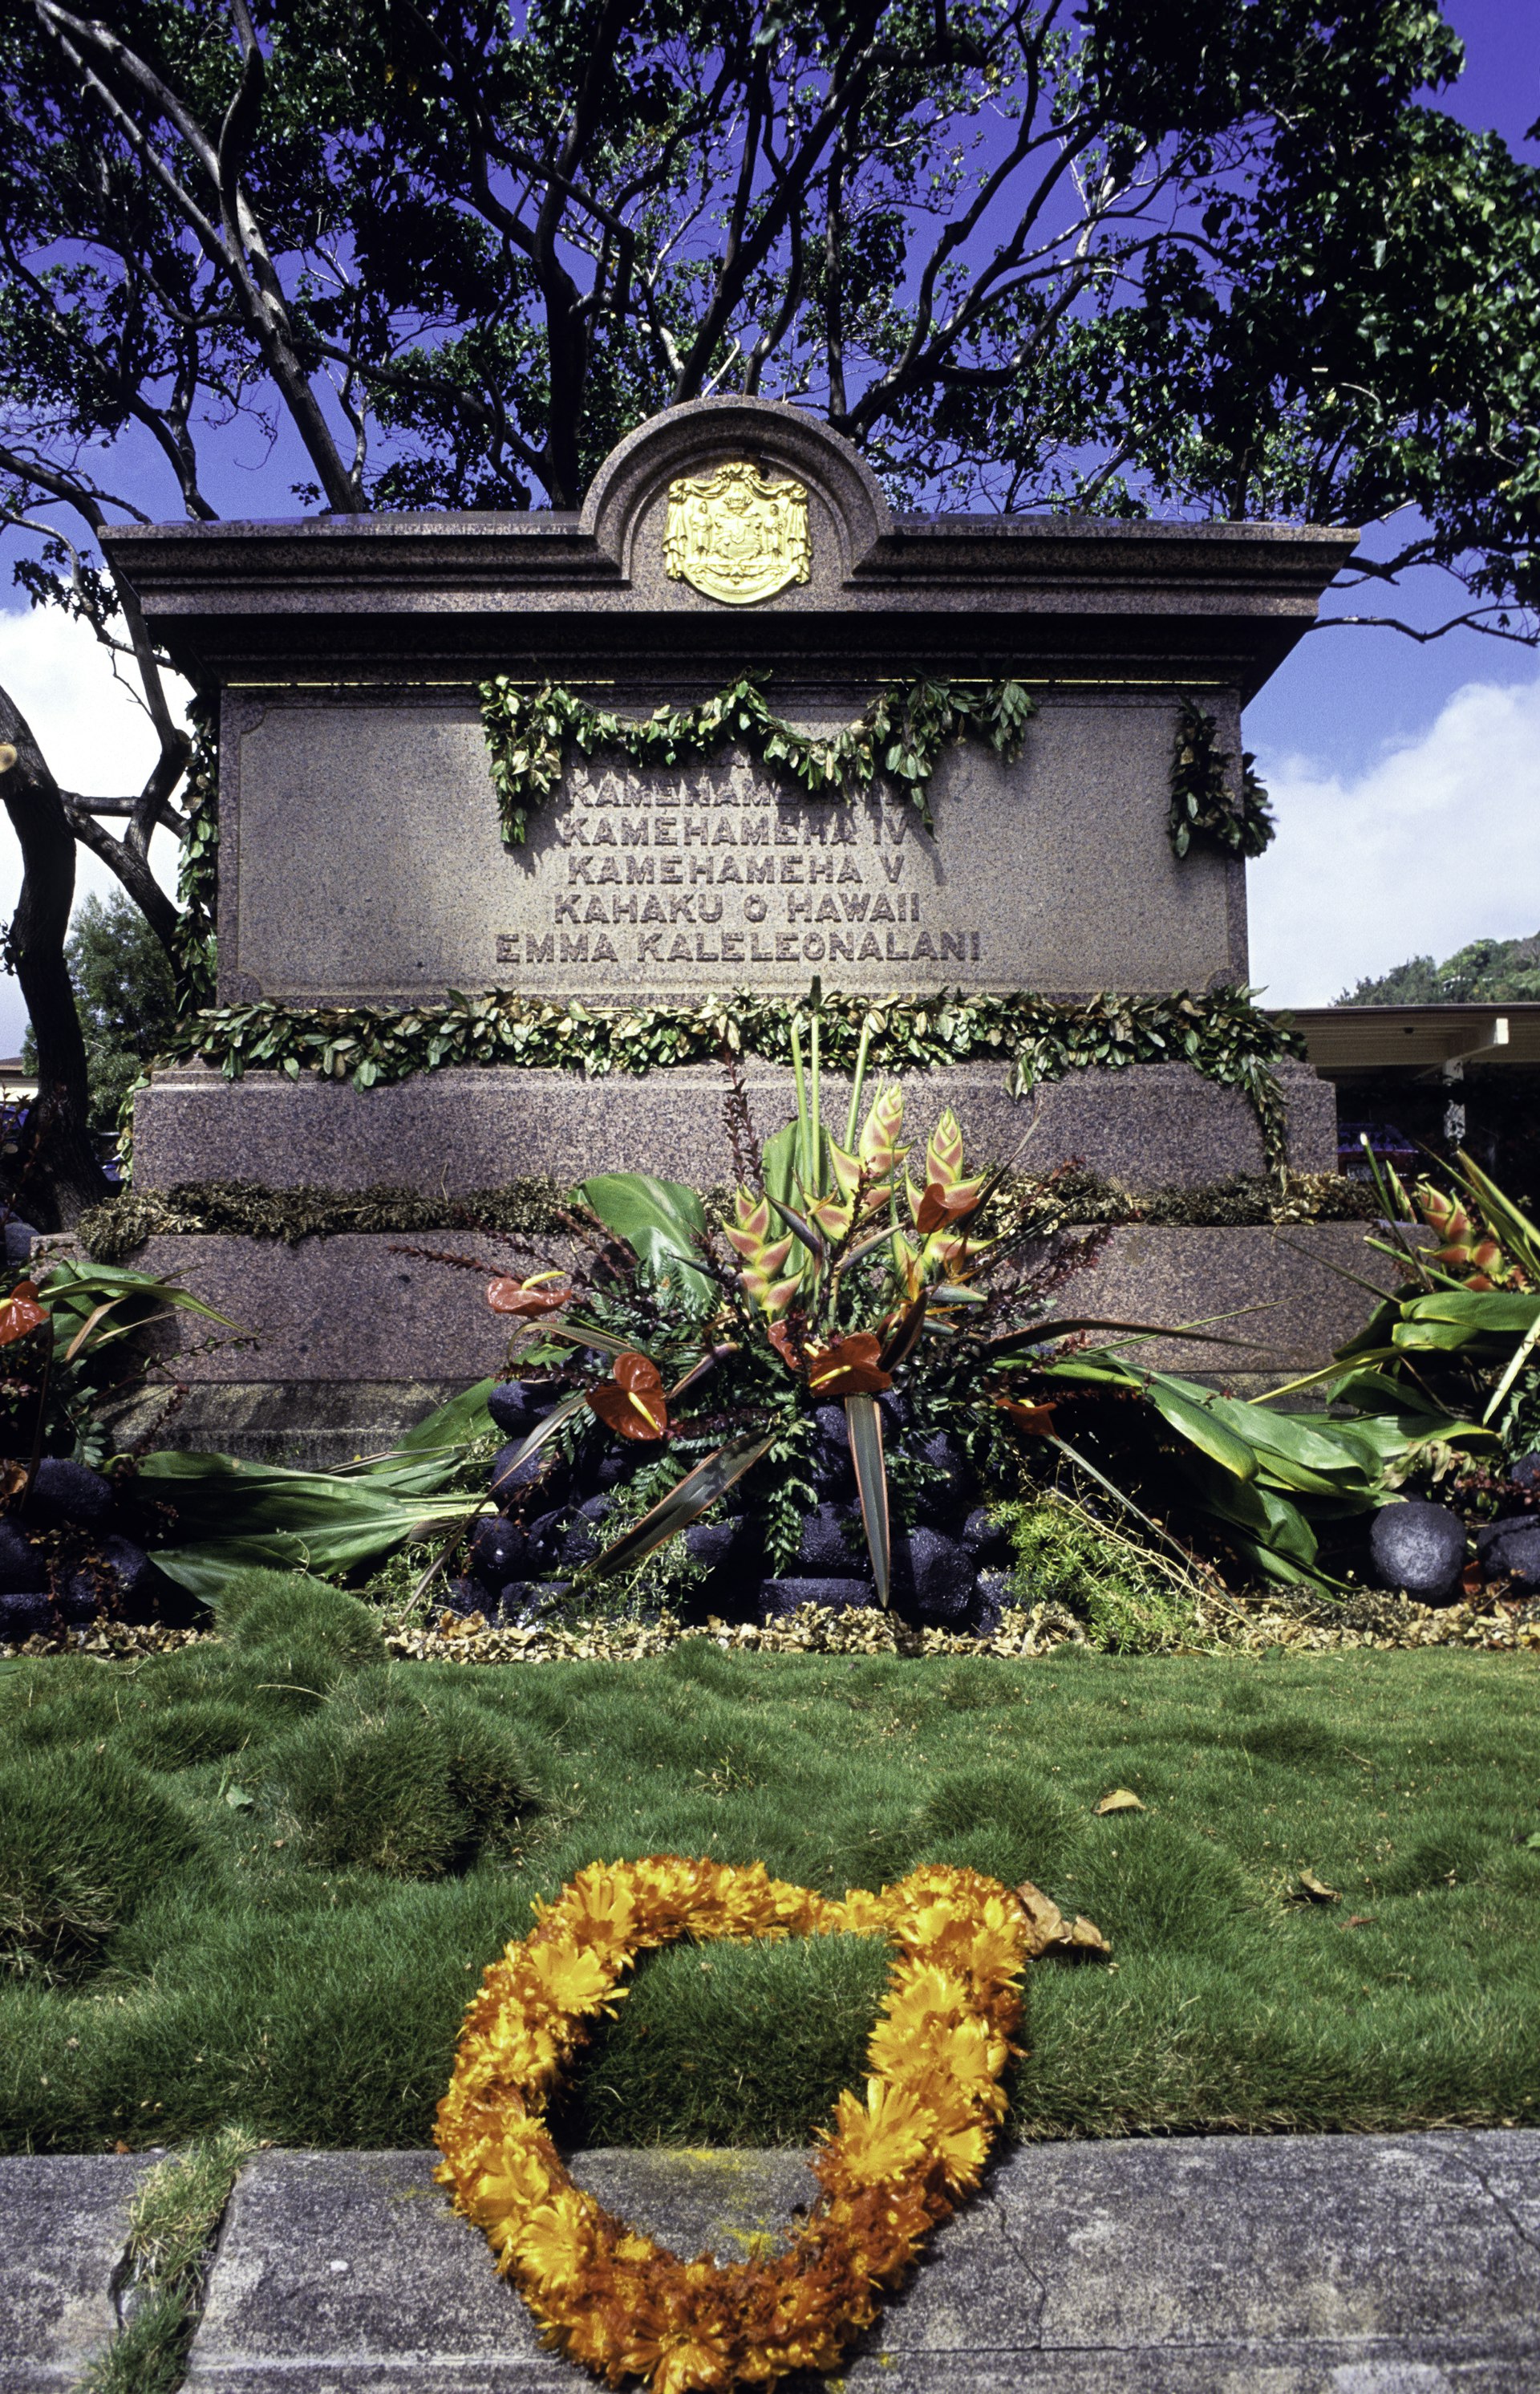 A large tomb with names of royalty engraved on it, and a ring of orange flowers at its base